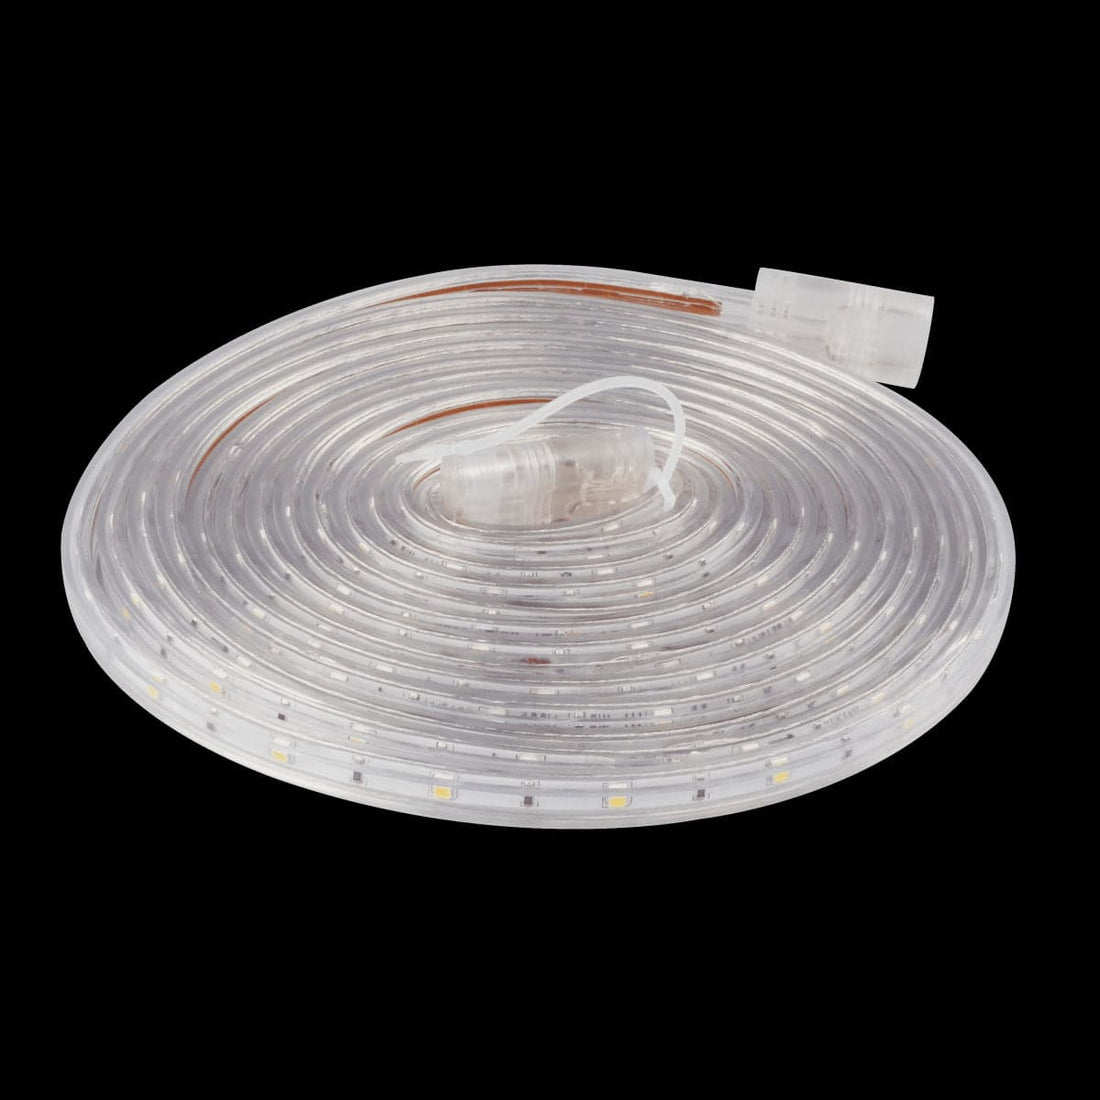 OUTFLEXI LED STRIP KIT 5MT 18W NATURAL LIGHT IP65 - best price from Maltashopper.com BR420005611